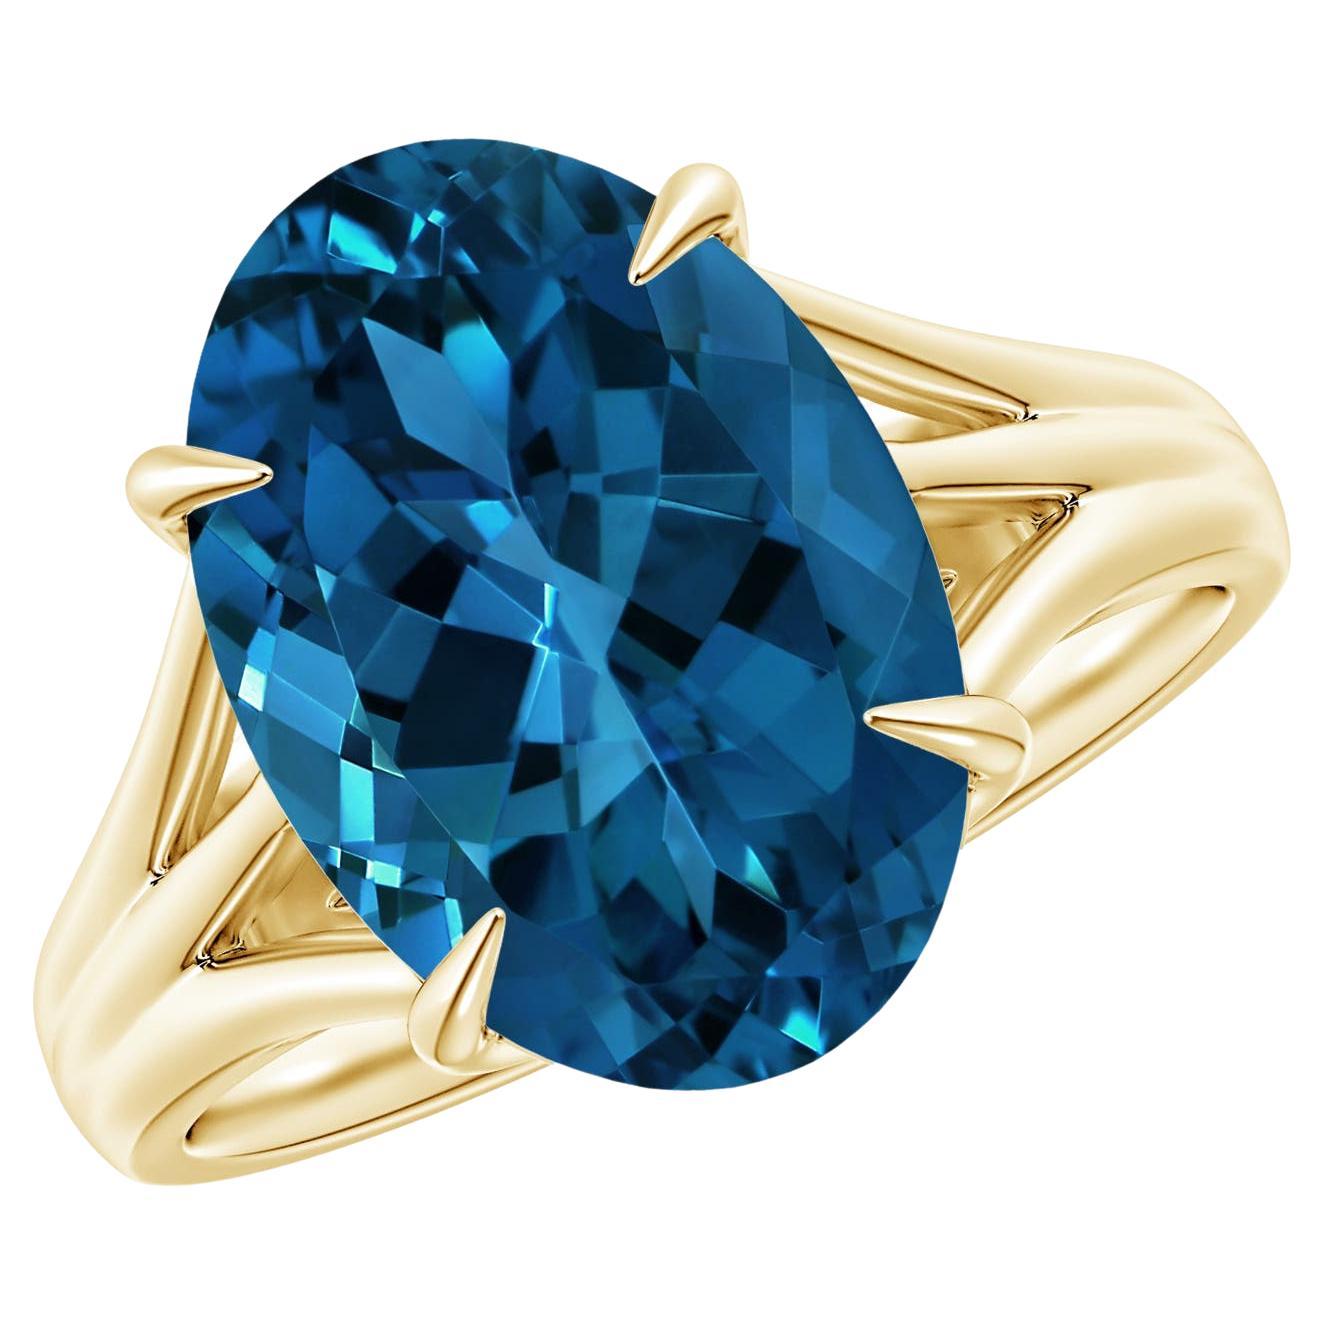 For Sale:  Angara GIA Certified Natural London Blue Topaz Engagement Ring in Yellow Gold